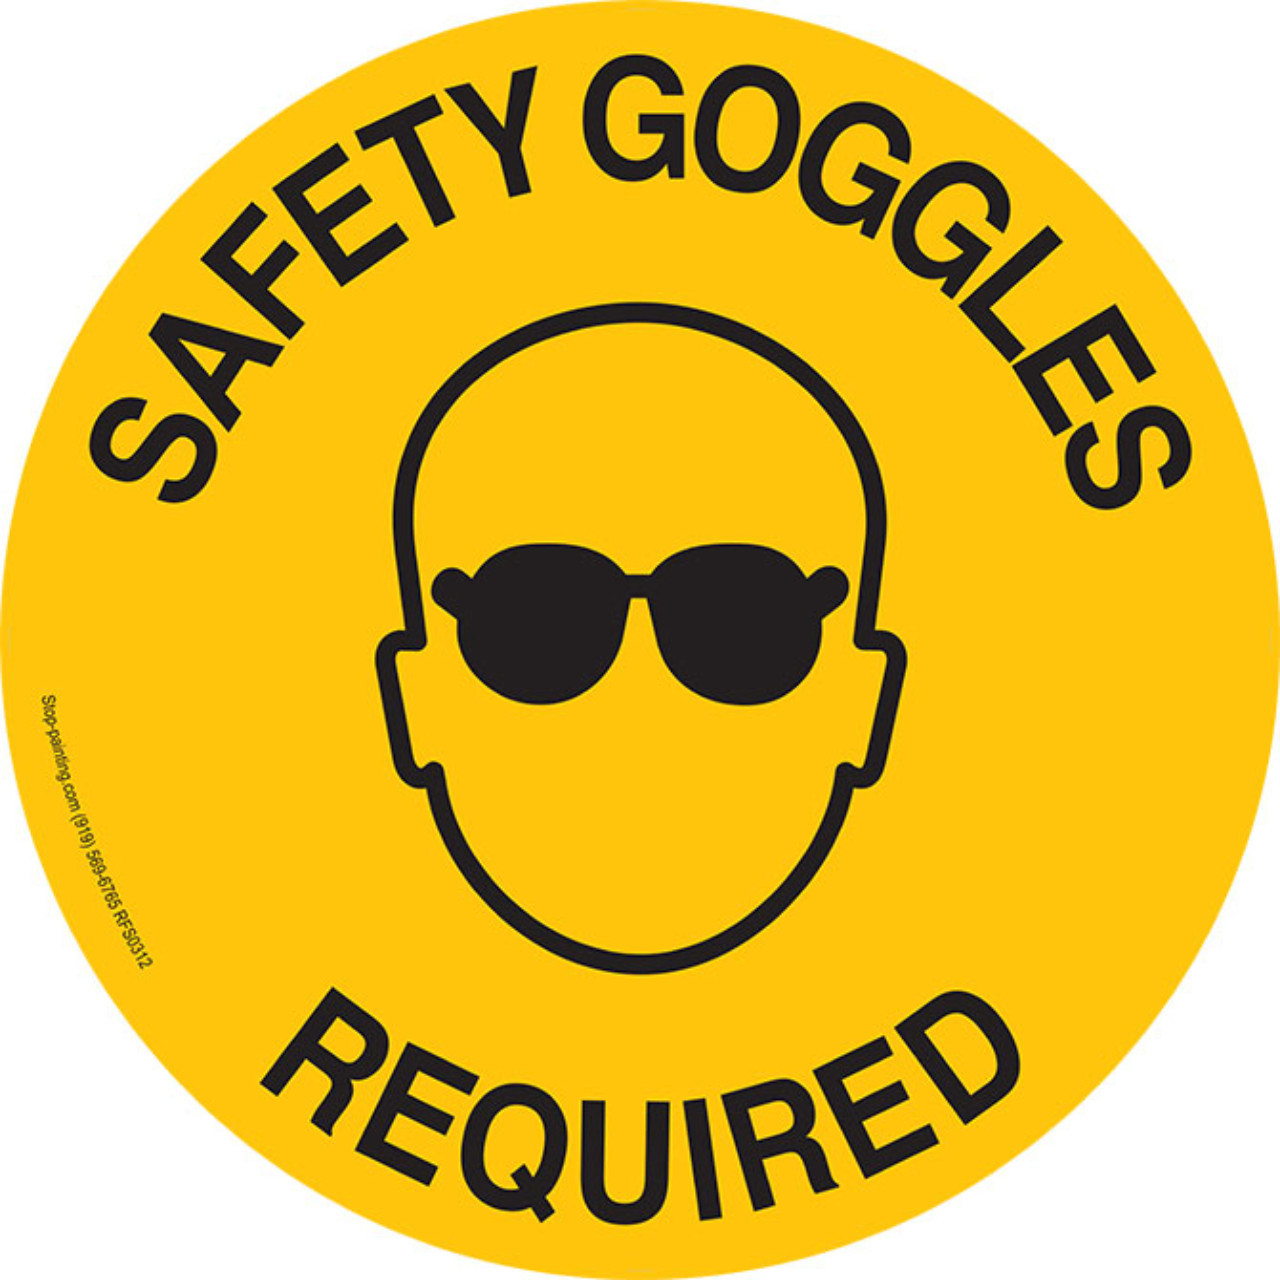 Safety Goggles Required Floor Sign Stop